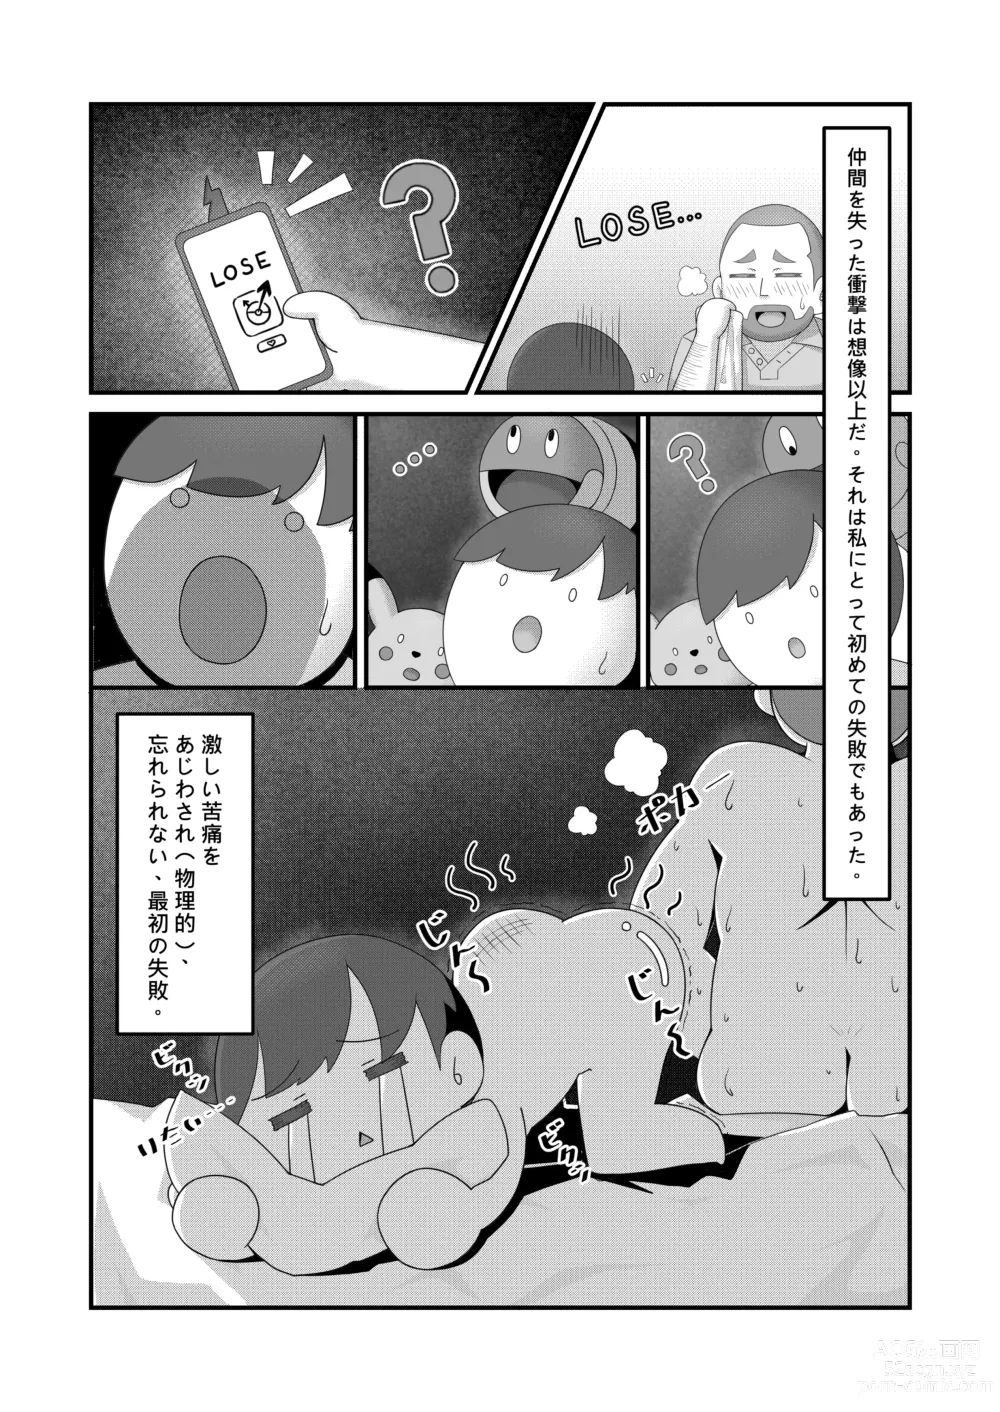 Page 3 of doujinshi Sex after Versus？ - ミモザ & キハダ